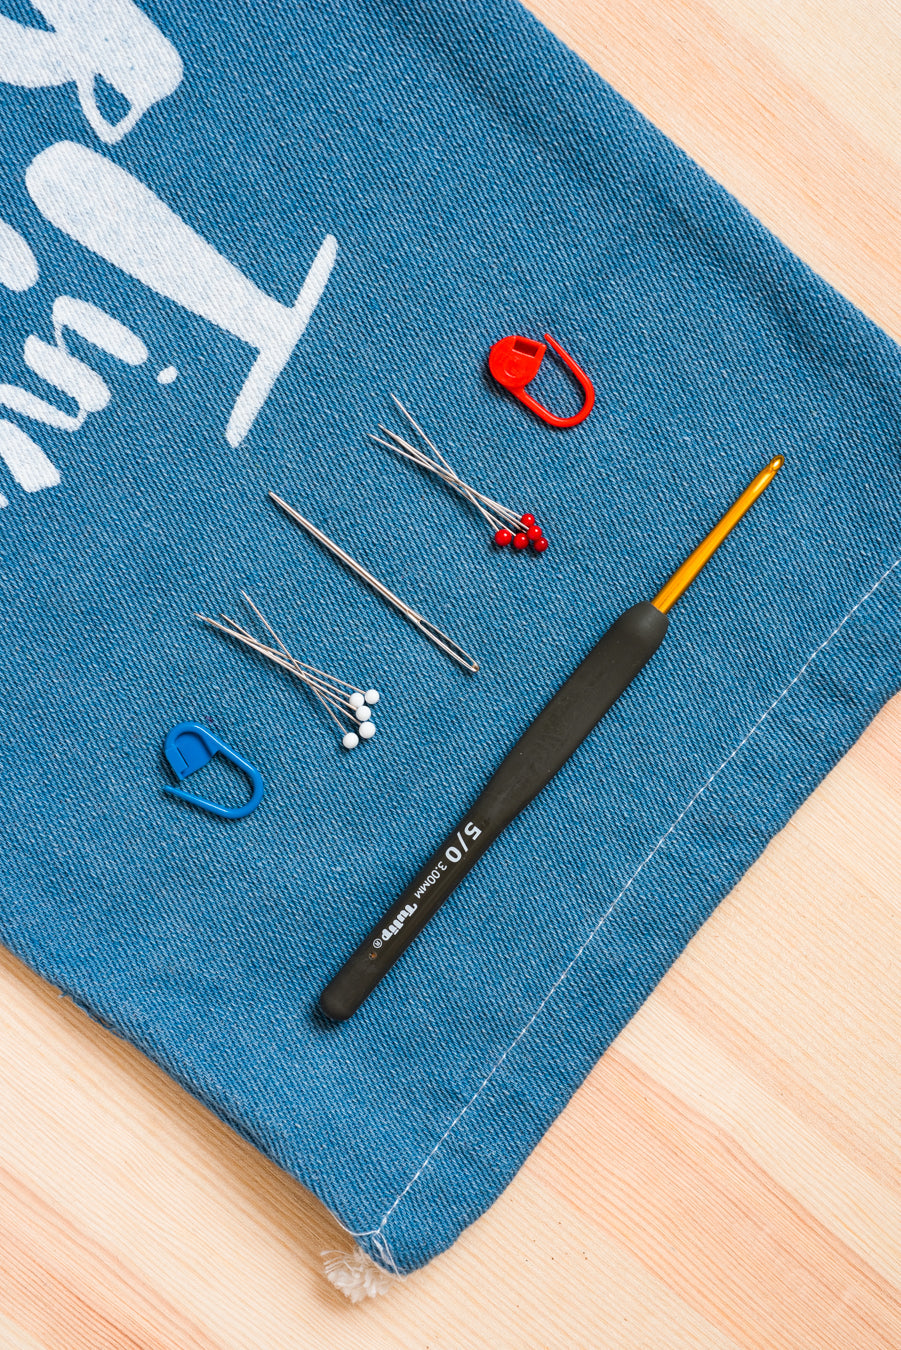 Basic Crochet Toolkit with Japan Tulip Hook (2.0 to 6.5mm)